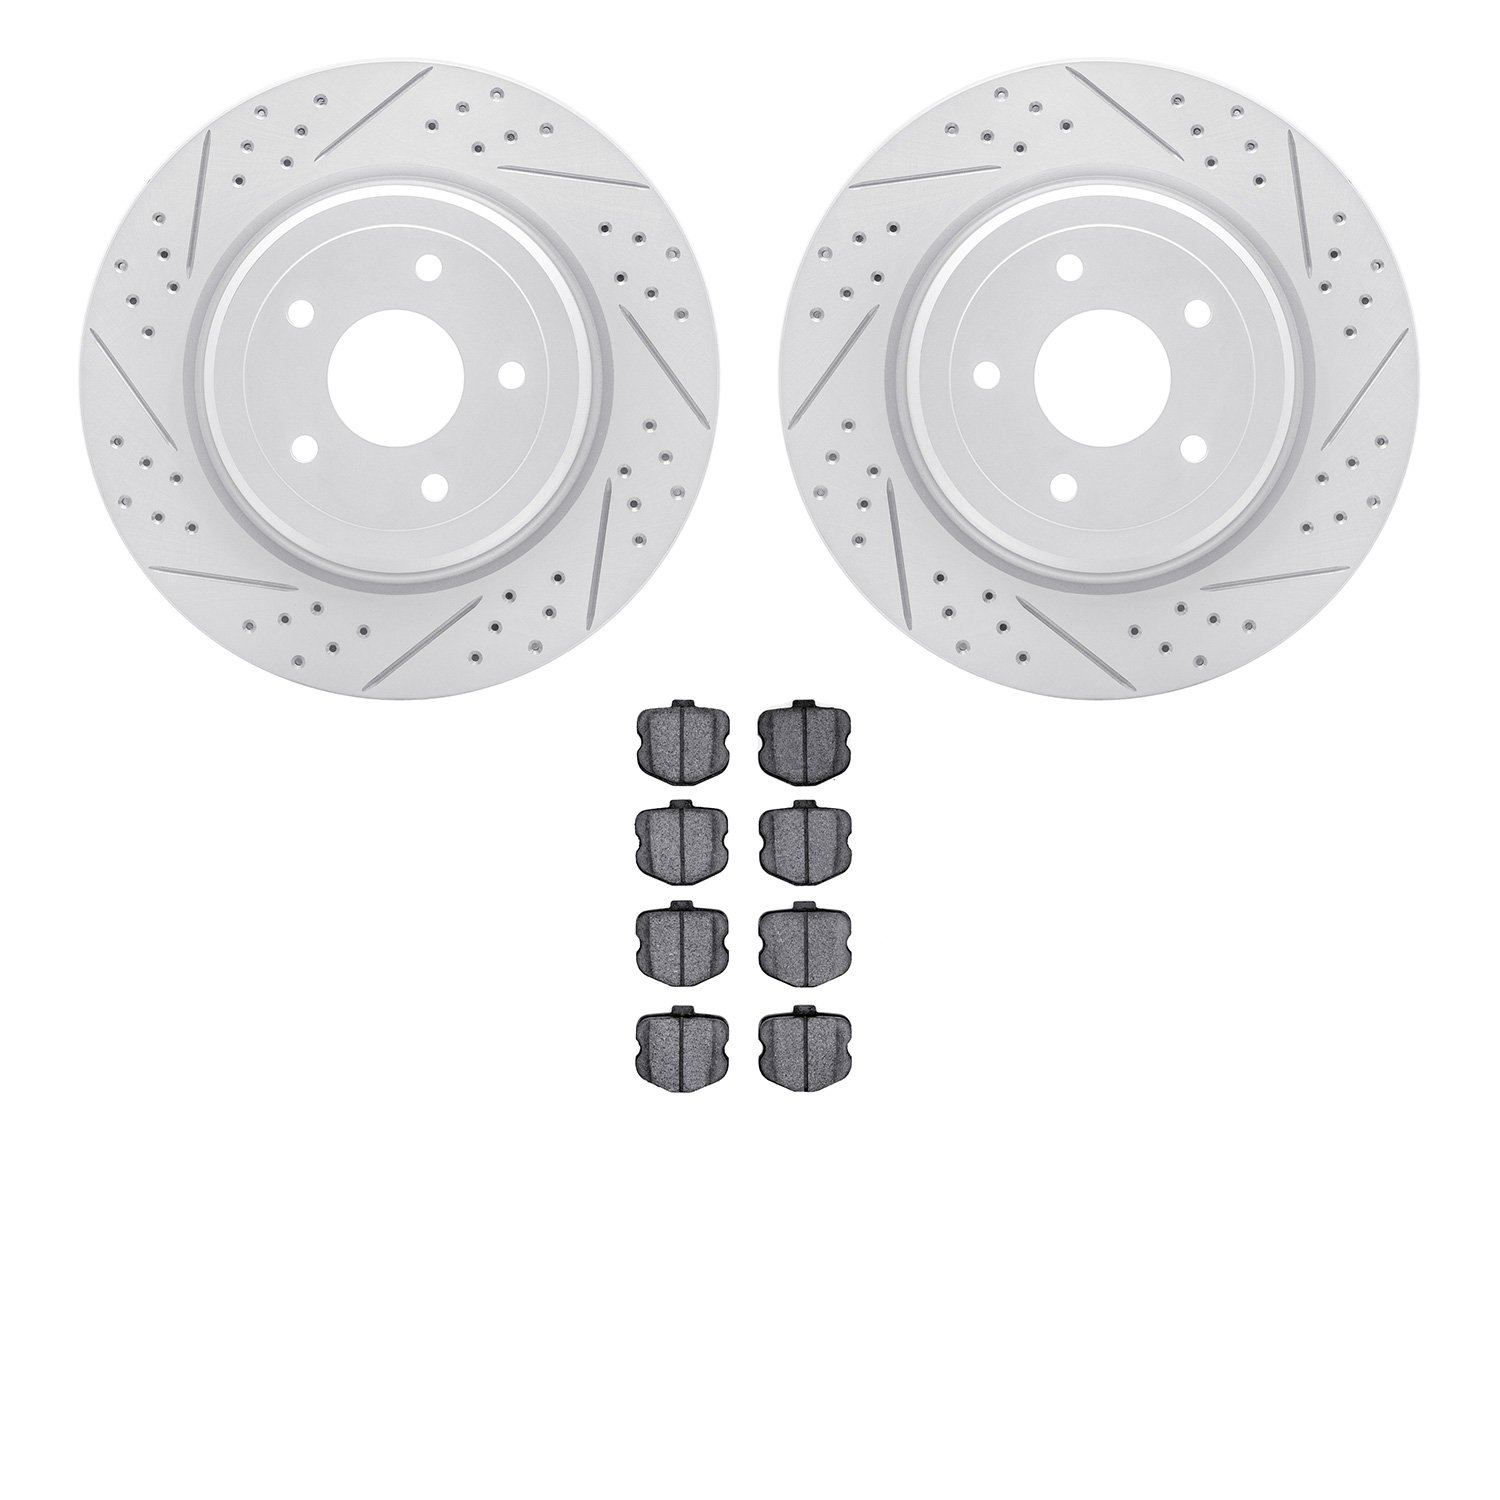 2502-47021 Geoperformance Drilled/Slotted Rotors w/5000 Advanced Brake Pads Kit, 2006-2013 GM, Position: Rear